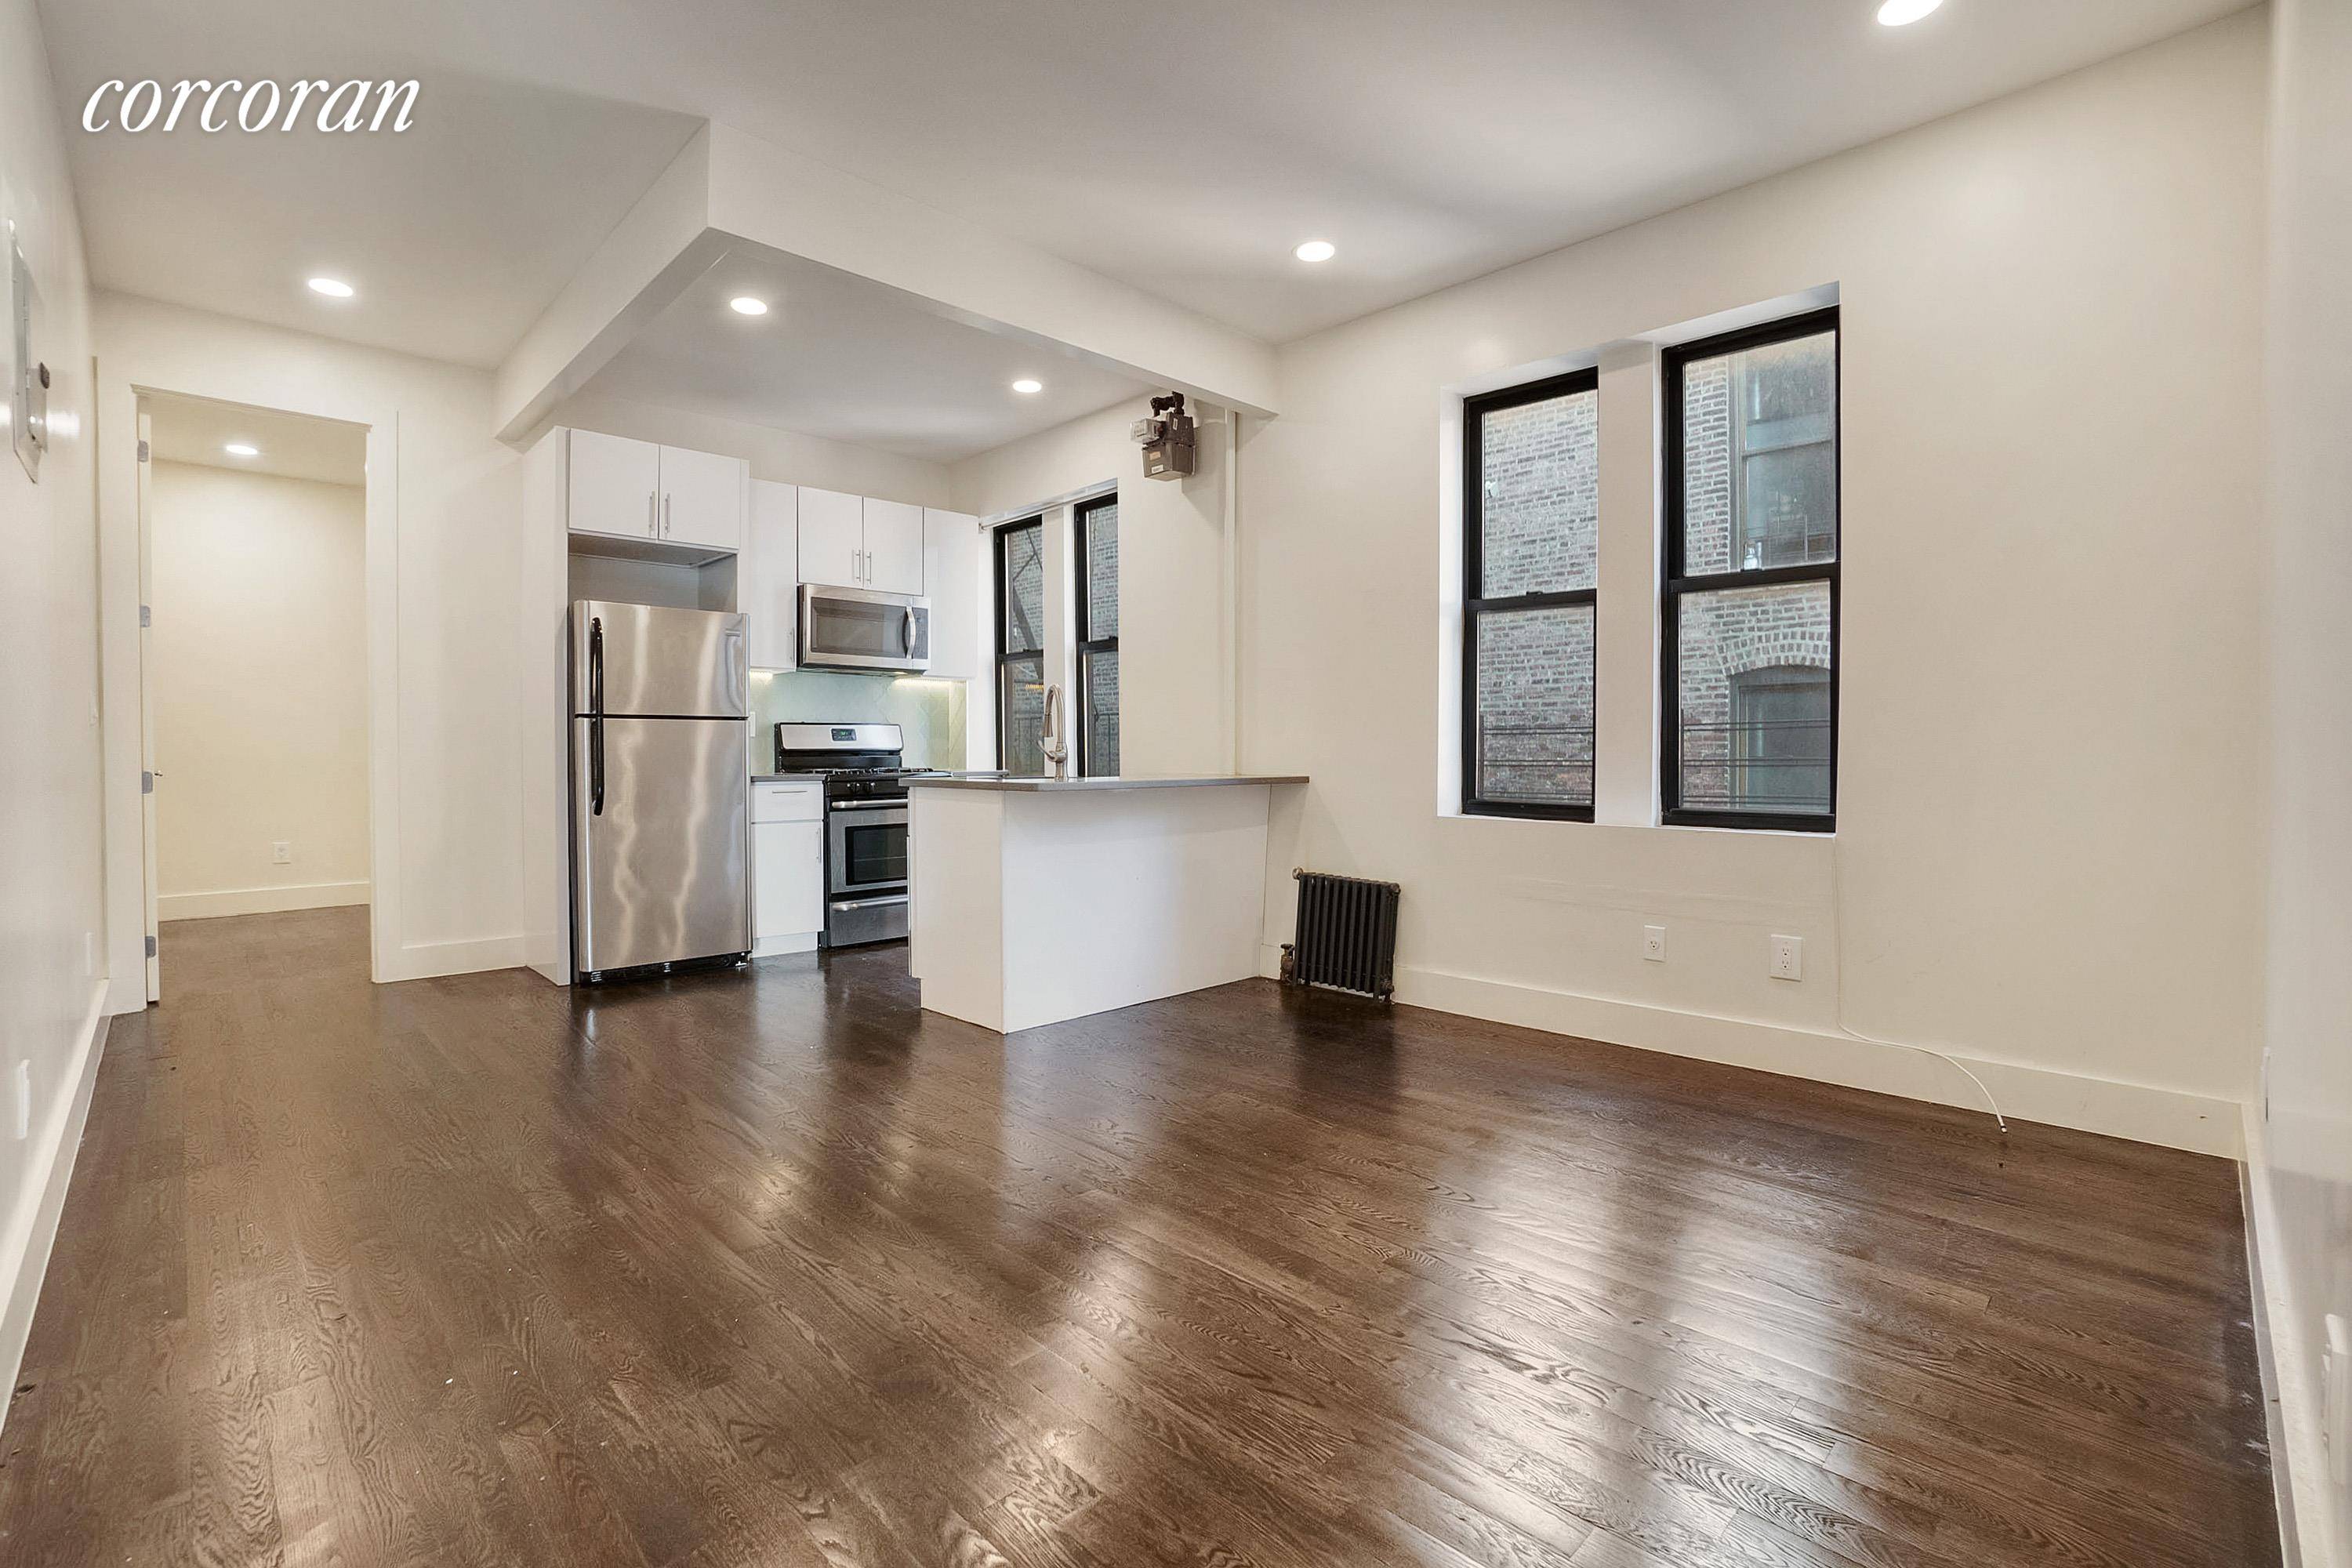 NO BROKER FEE ! Very Spacious True 3 Bedroom a Washer Dryer in a Prewar elevator building situated 1 block from the West 157th Street 1 Subway Line !